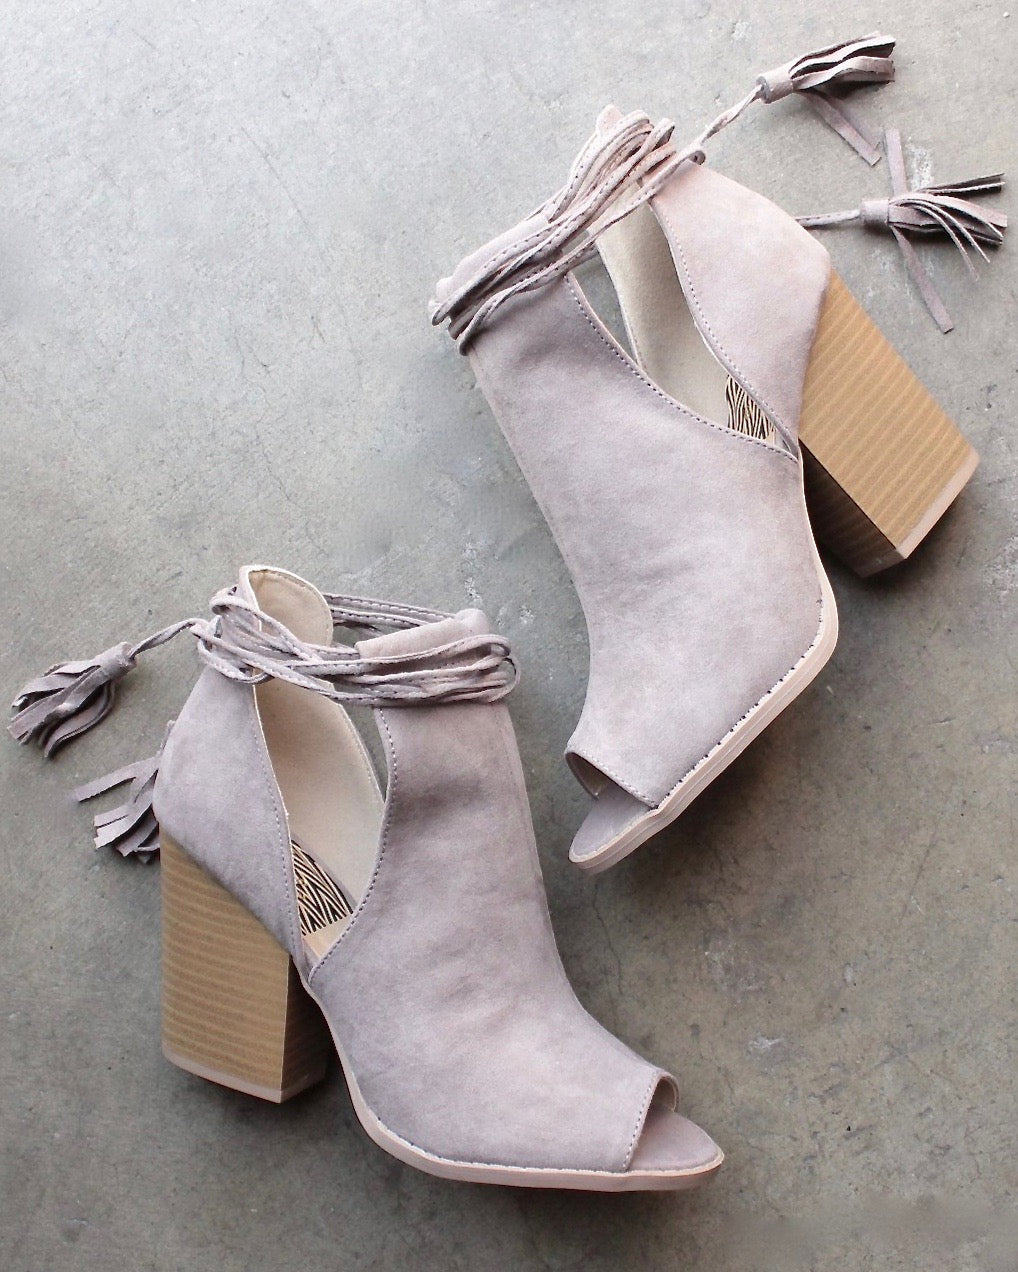 qupid booties taupe